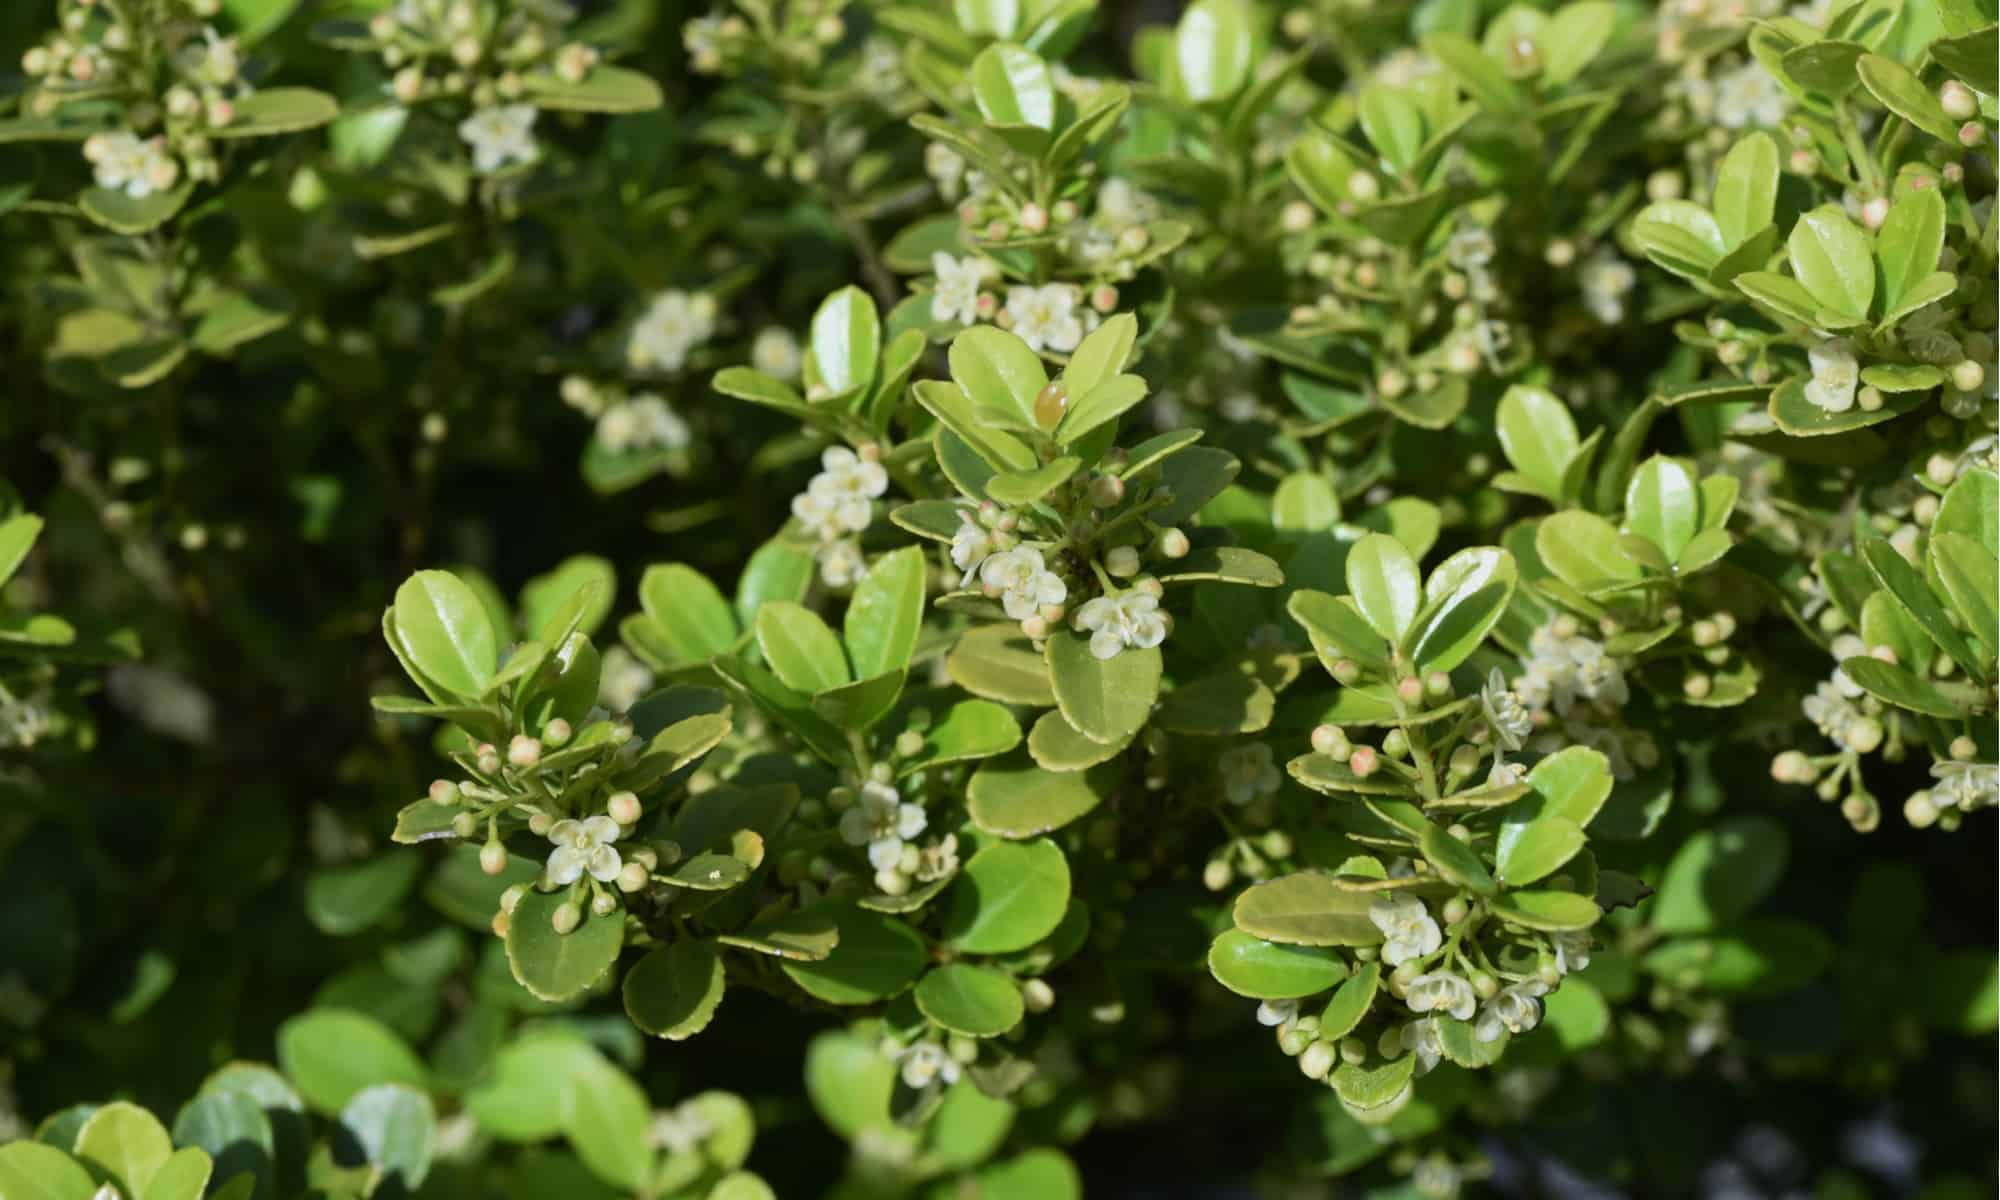 Image of Boxwood companion plant for Japanese holly